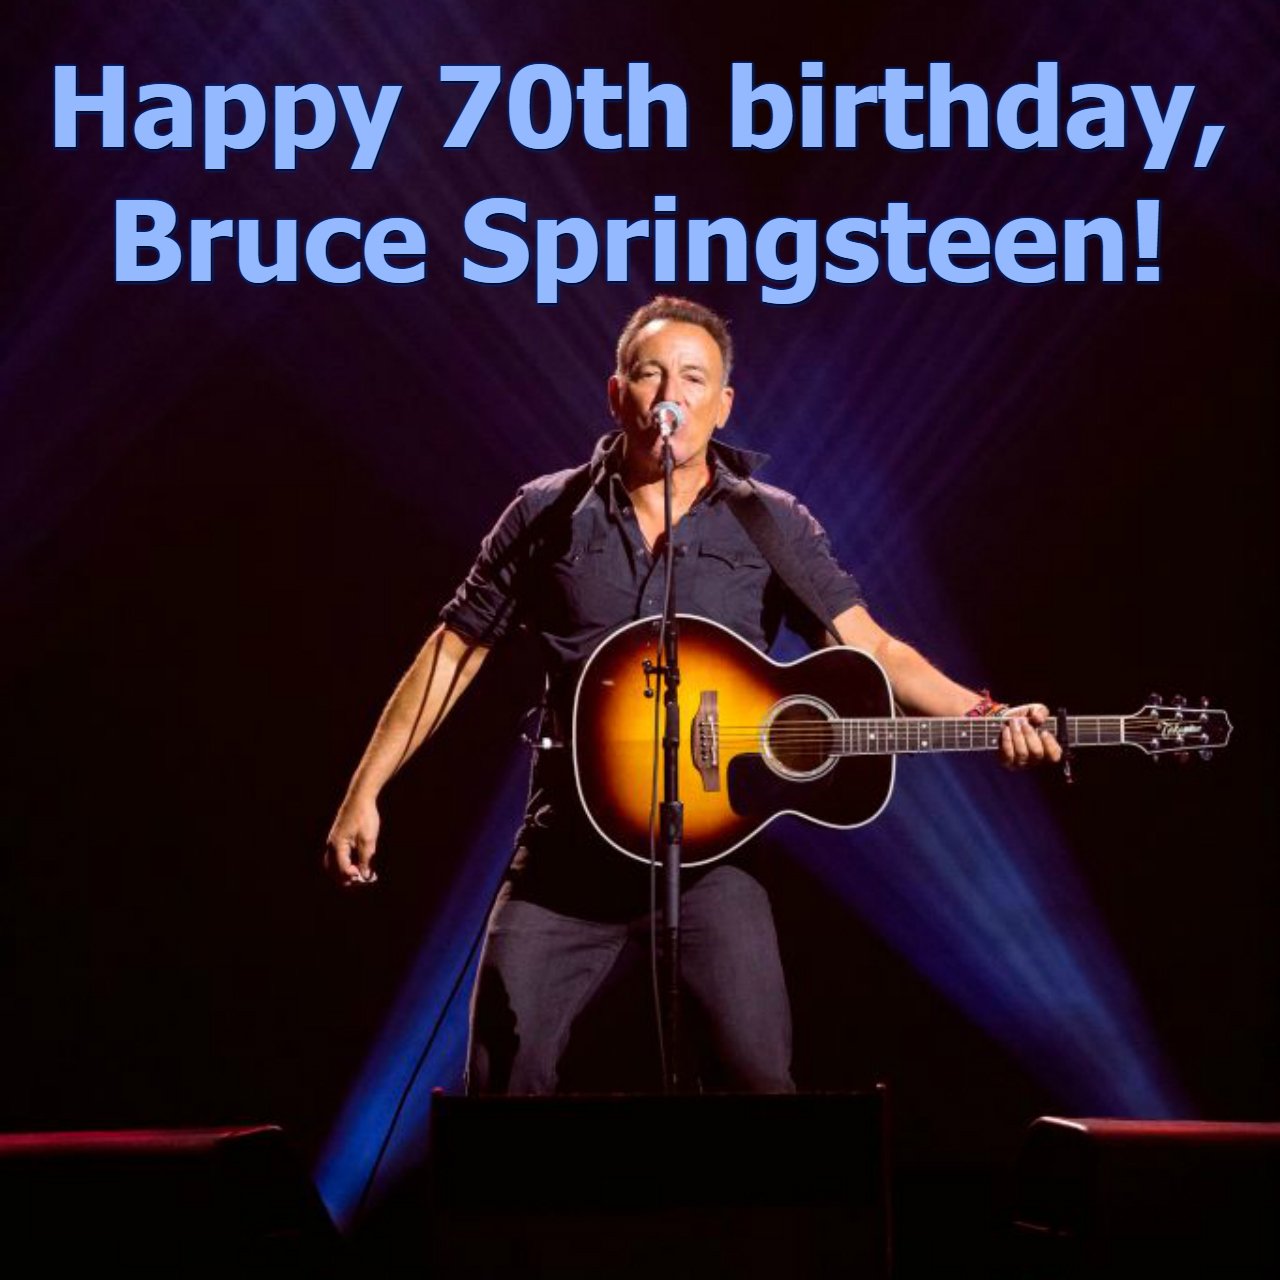 Happy birthday to The Boss! Bruce Springsteen turns 70 today! 